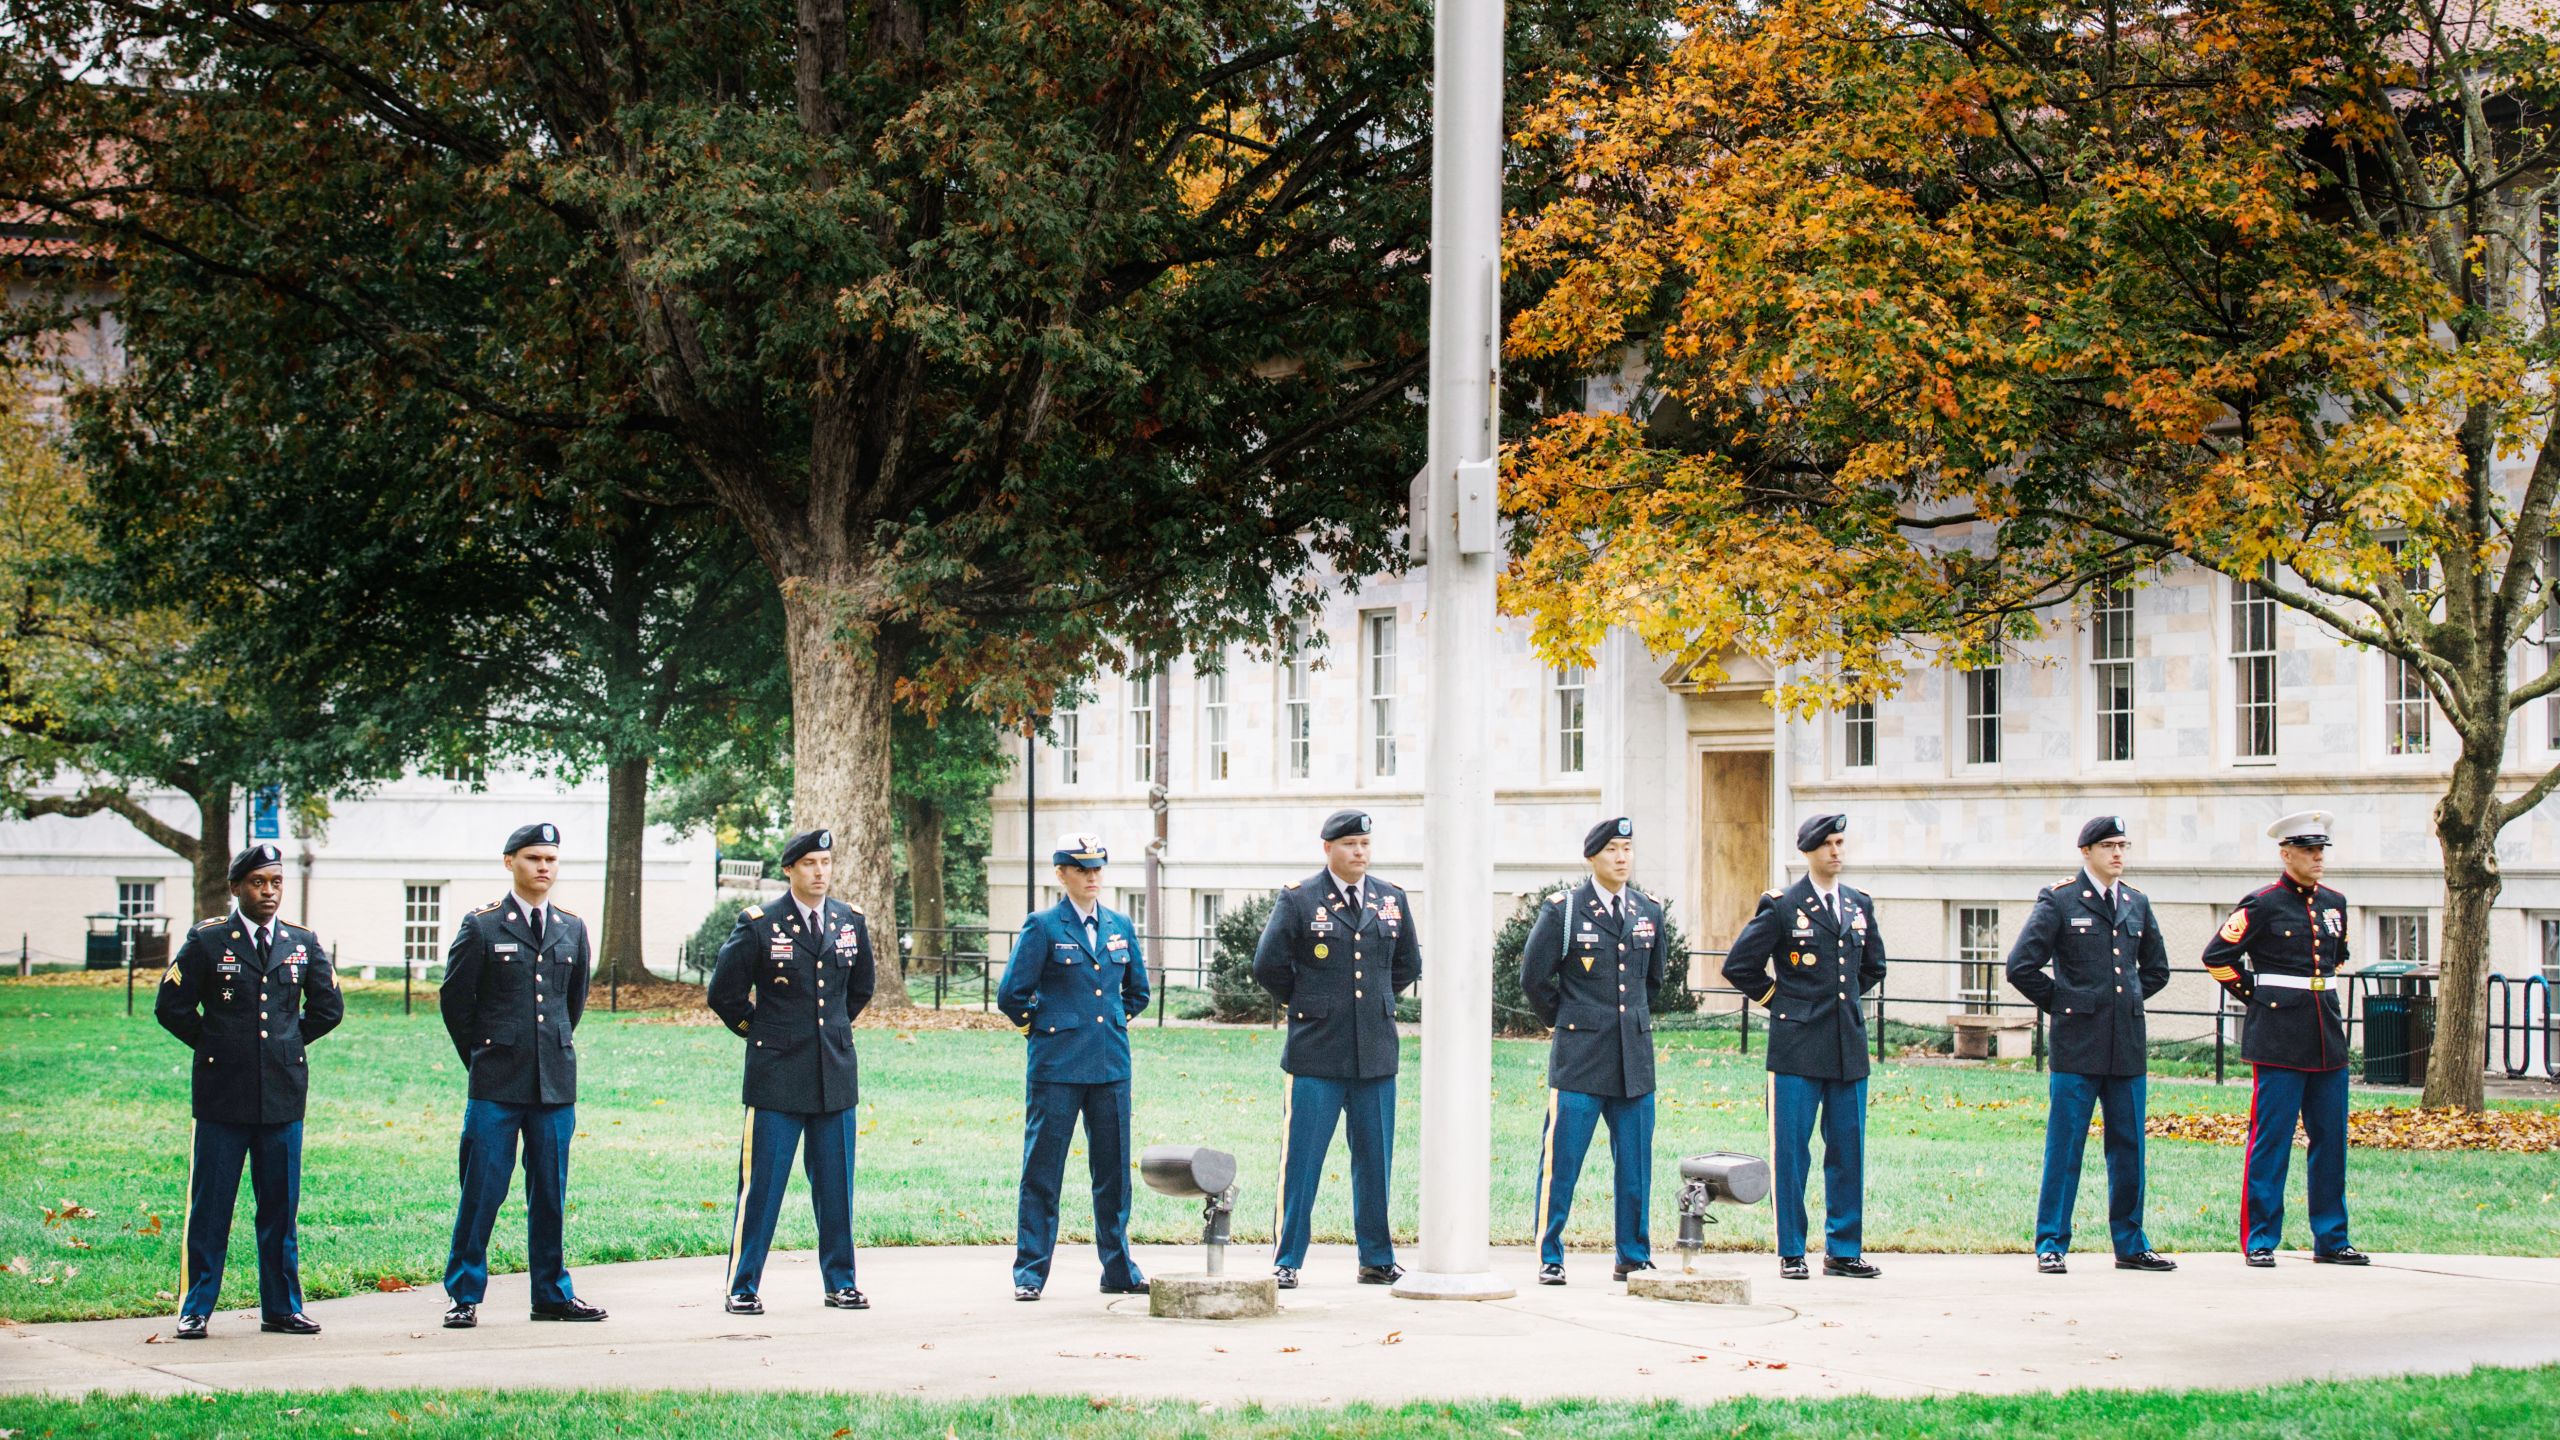 Men and women in uniform stand at attention by the Emory flag pole during the annual Veterans Day ceremony.